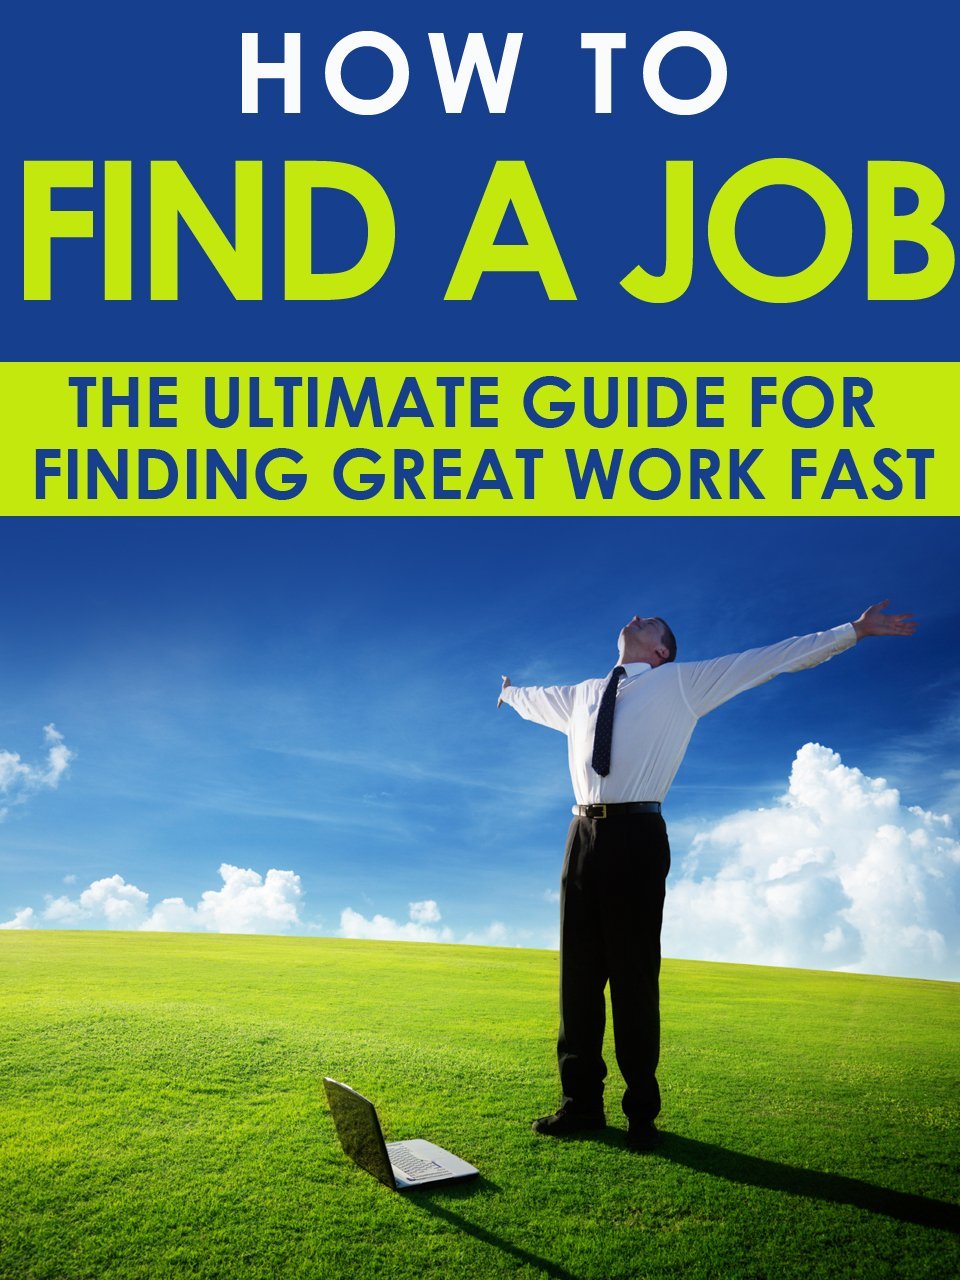 How to Find a Job: The Ultimate Guide for Finding Great Work Fast by Linda Callaway